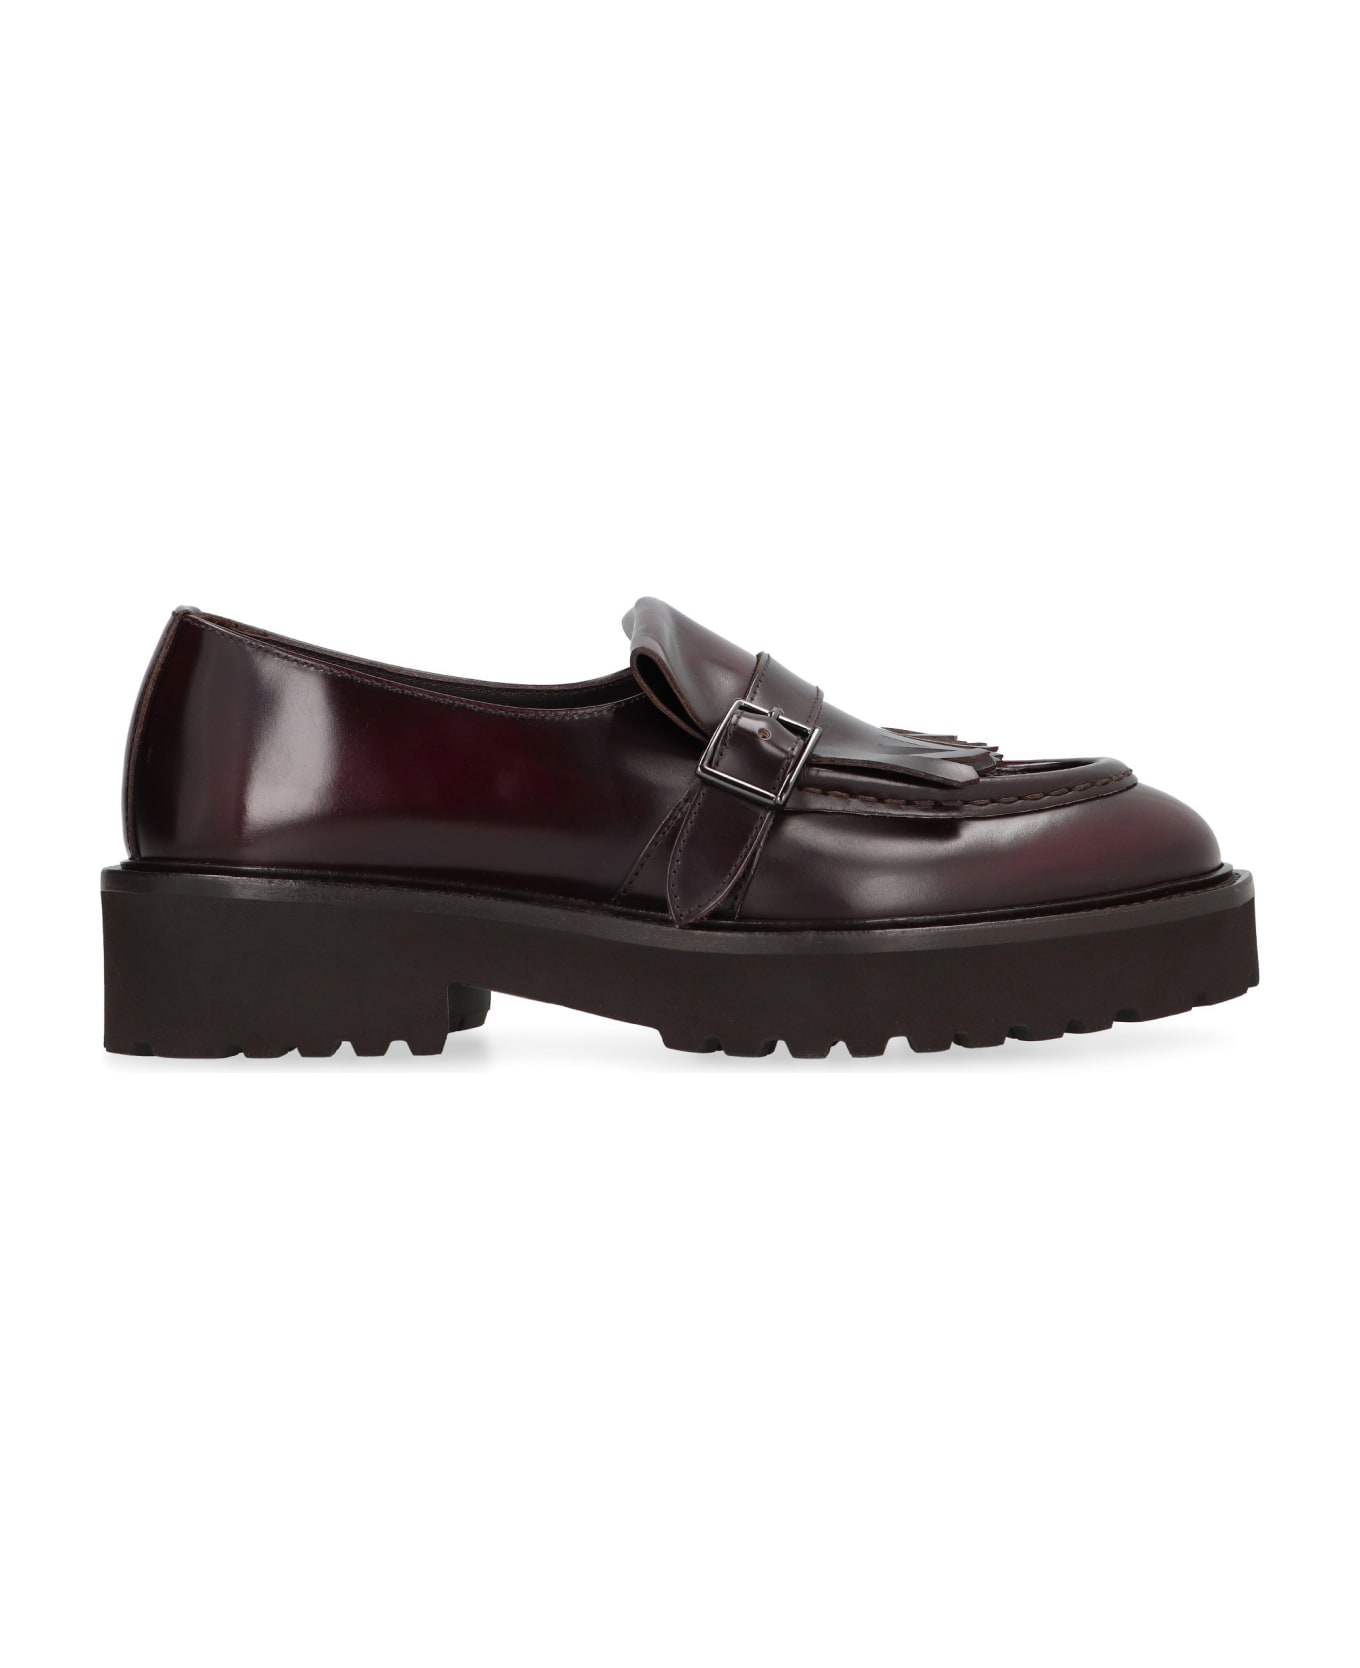 Doucal's Leather Loafers - Burgundy フラットシューズ